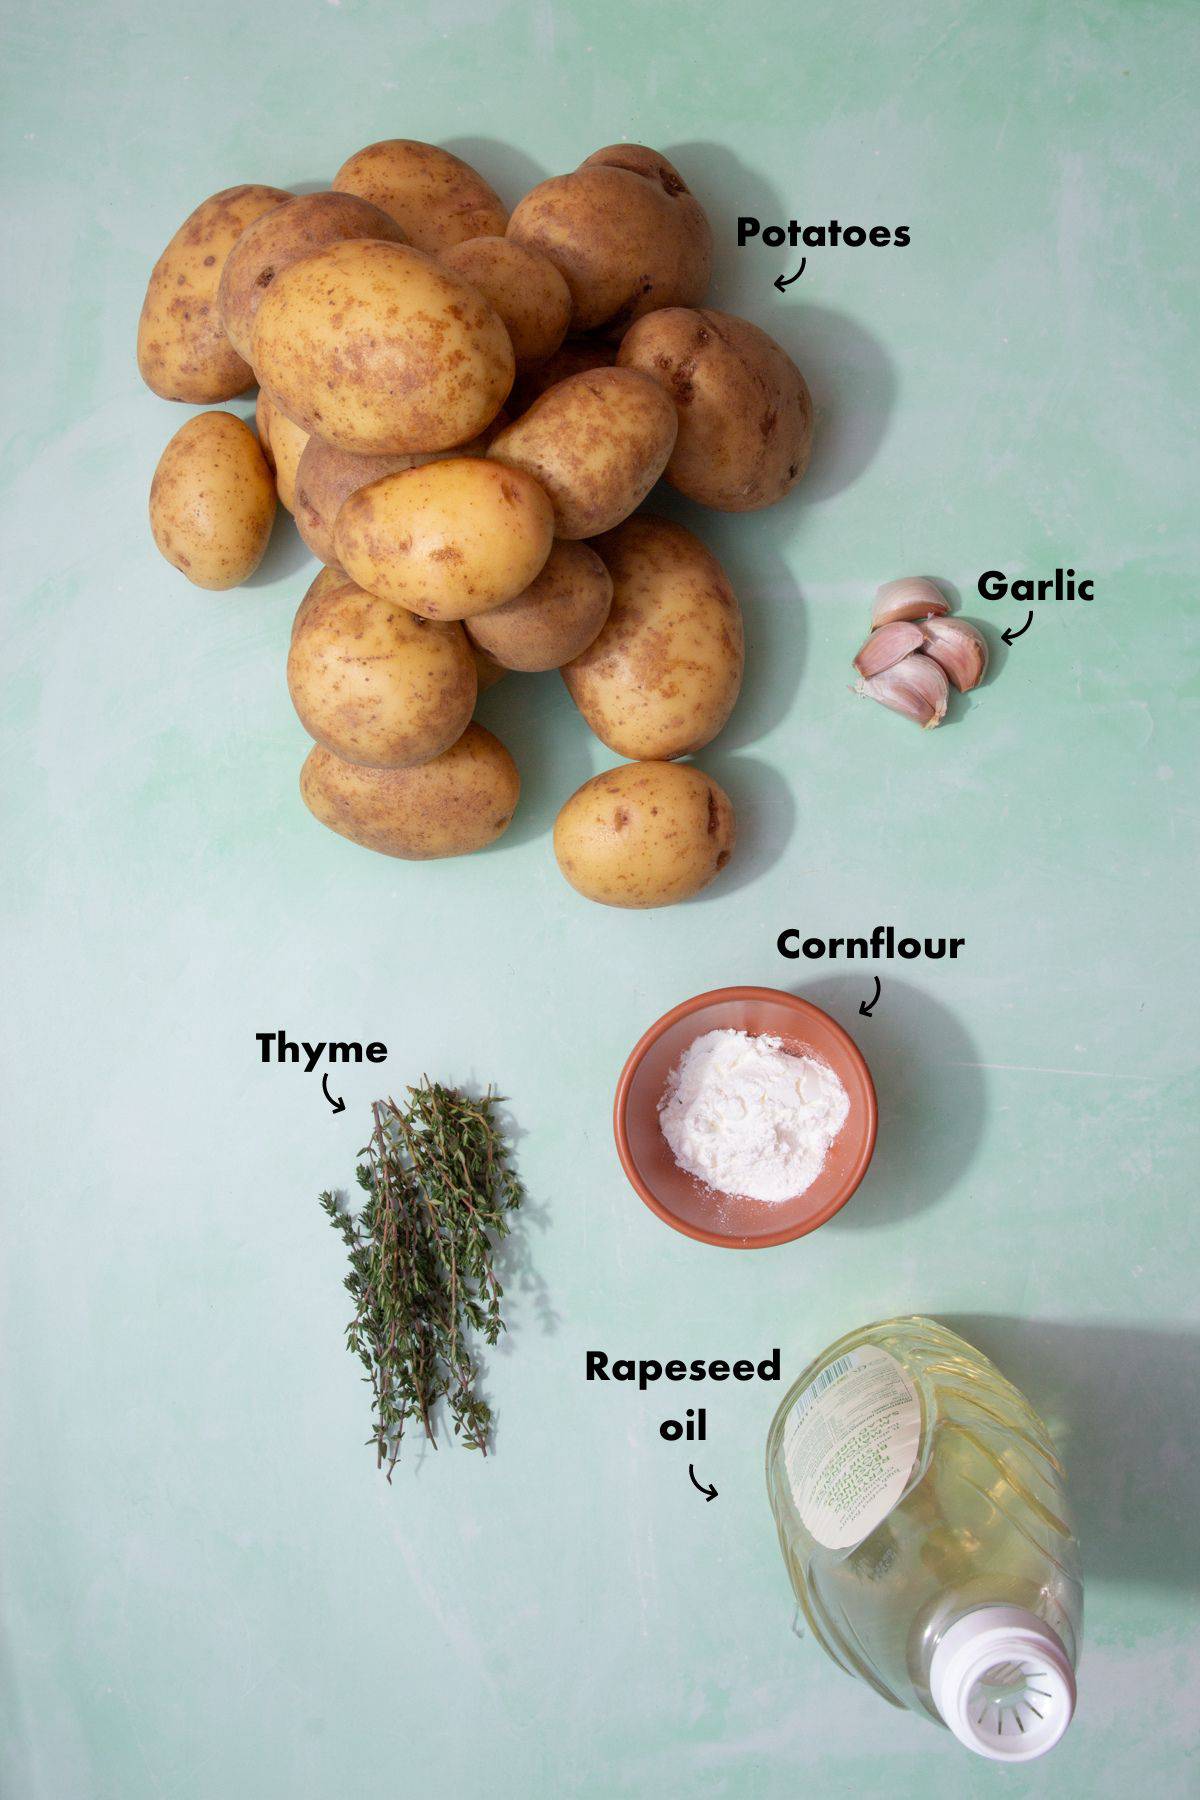 Ingredients to make roast potatoes laid out on a pale blue background and labelled.